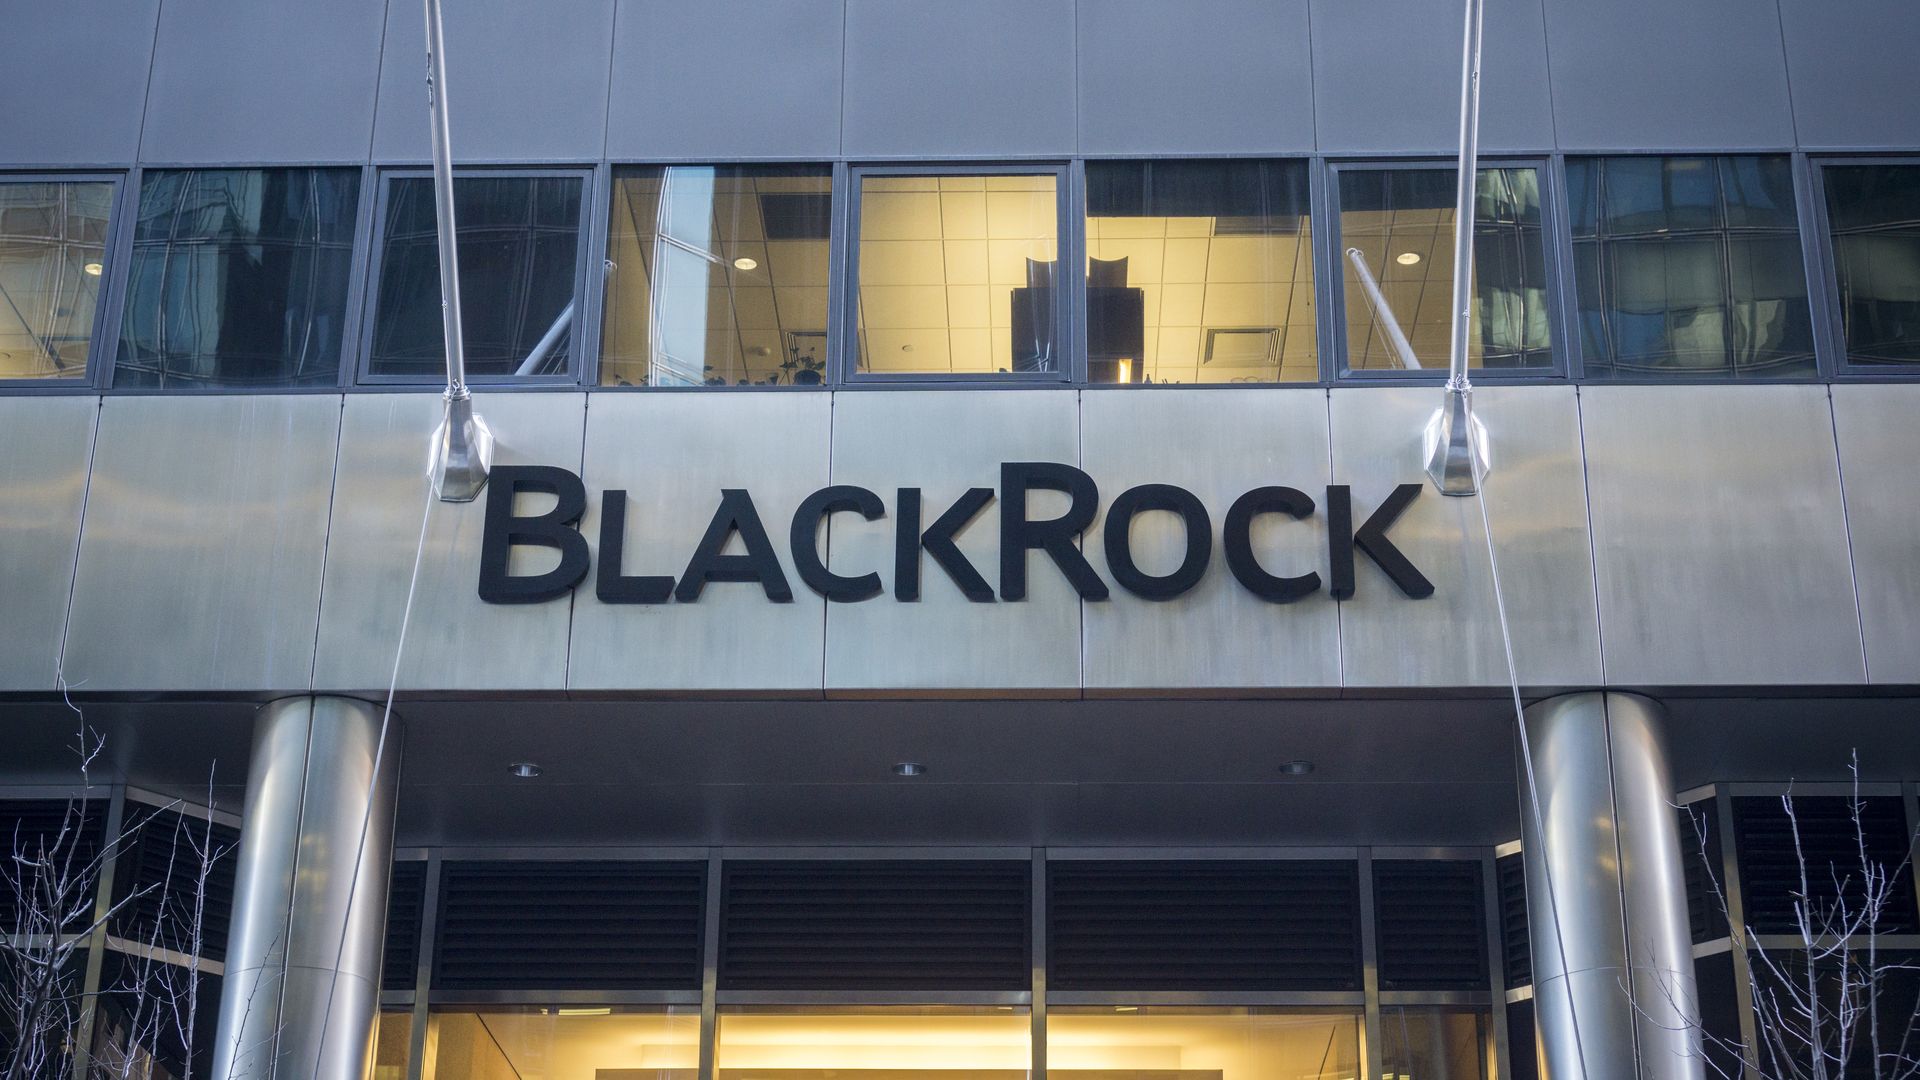 The New York headquarters of the BlackRock investment management firm on Friday, February 5, 2016.